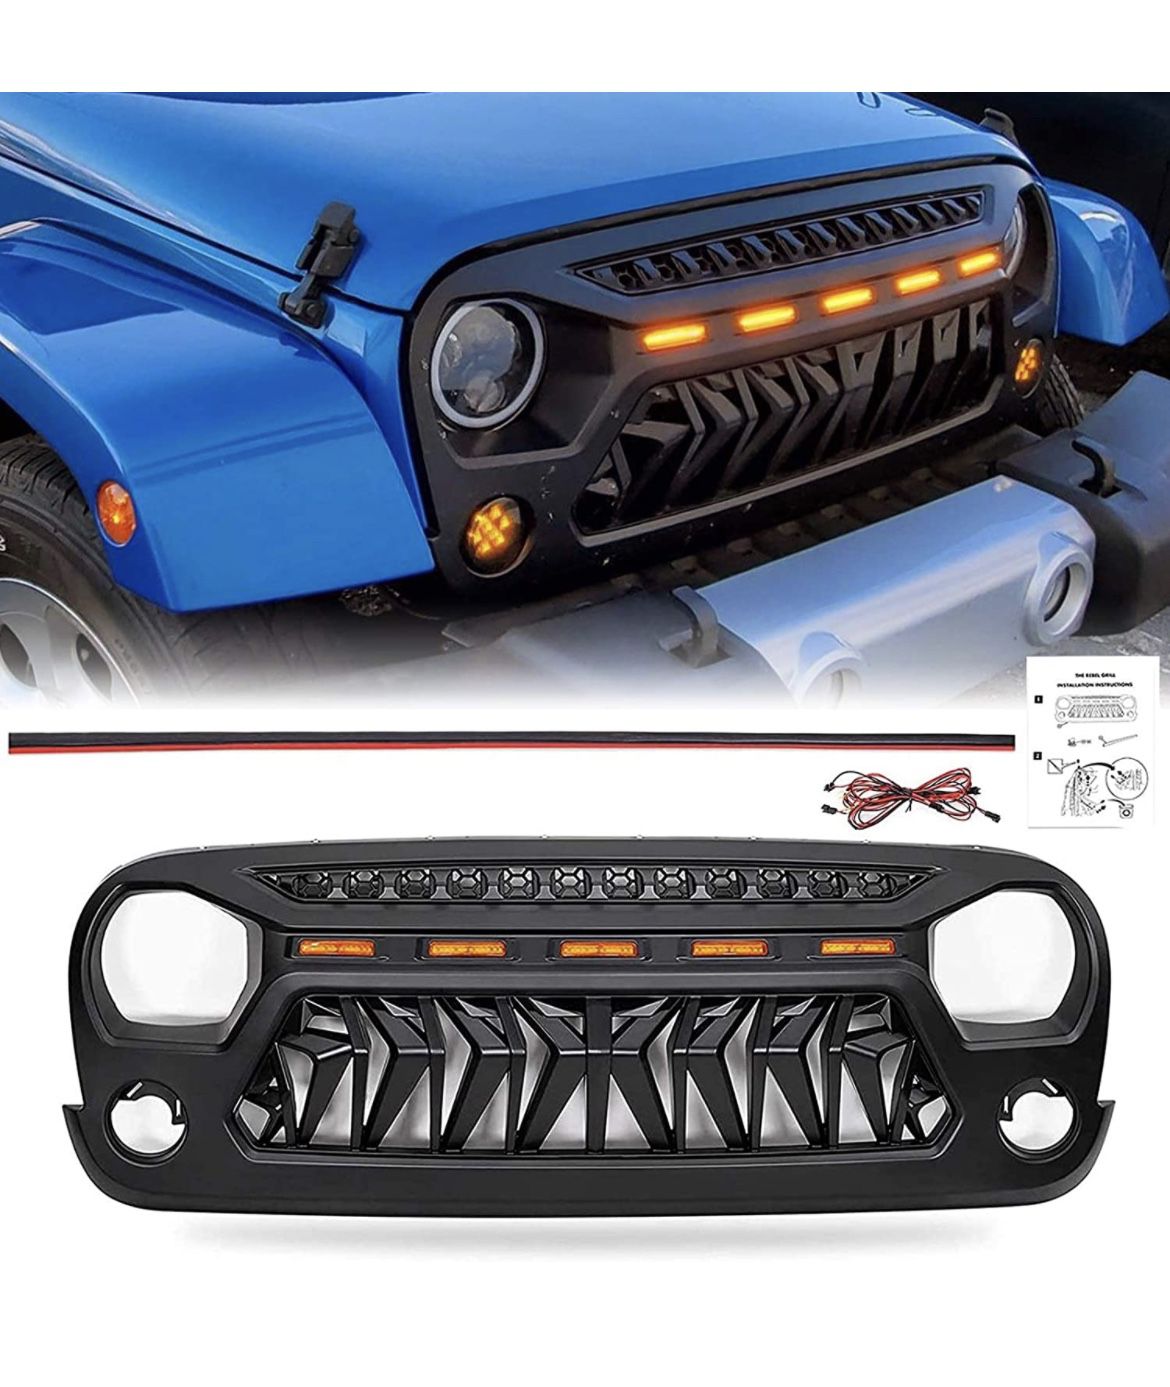 Haitzu Shark Grill Fit for Jeep Wrangler 2007-2018 JK Accessories, Matte Black Grille with 5 Amber Lights Including JKU Unlimited Rubicon Sahara Sport